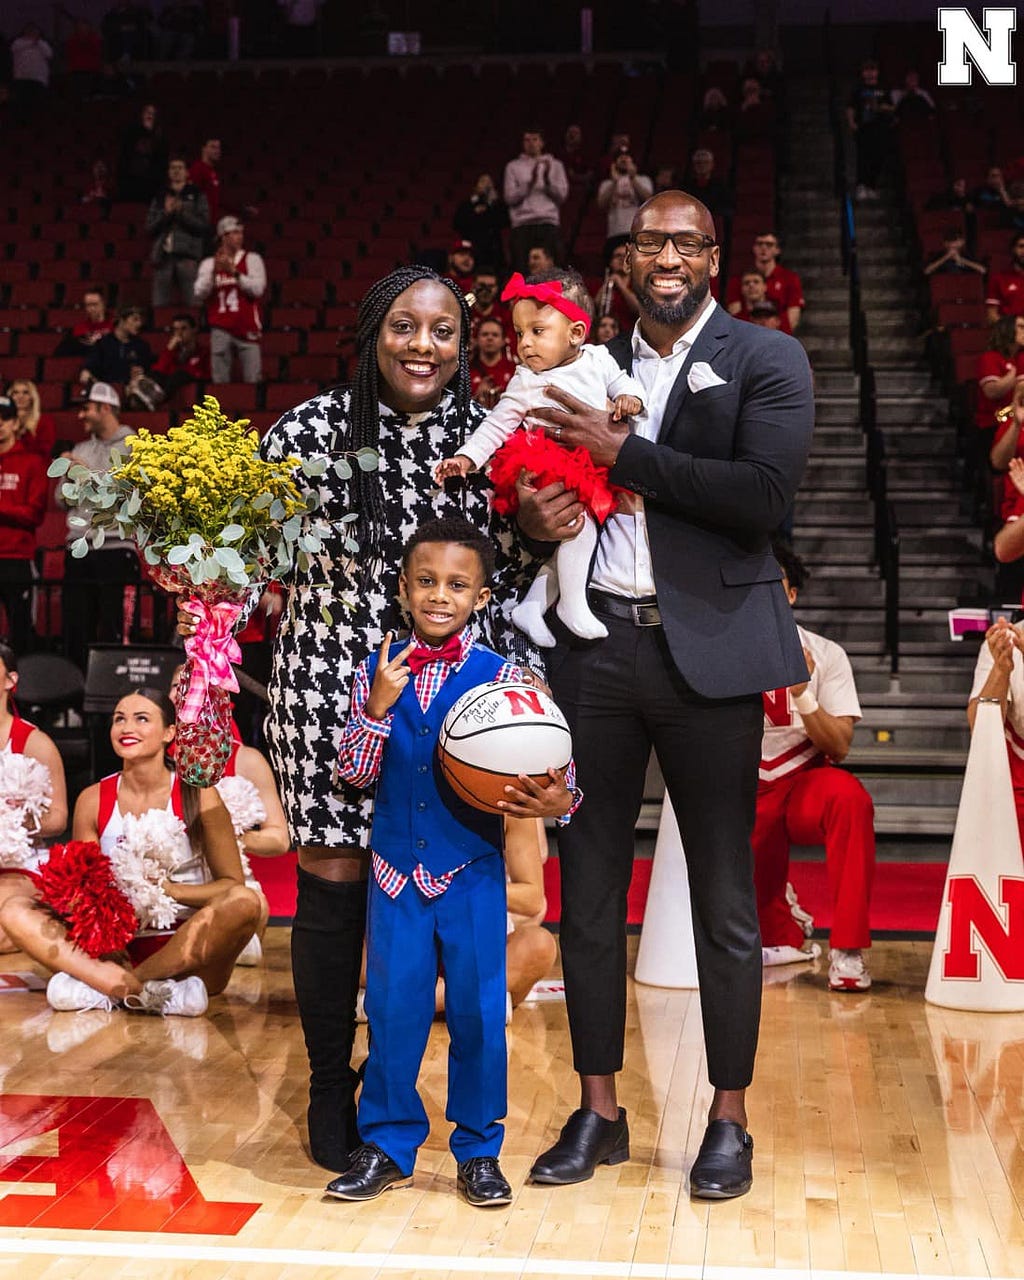 Dominique is honored alongside her family during a Husker basketball game